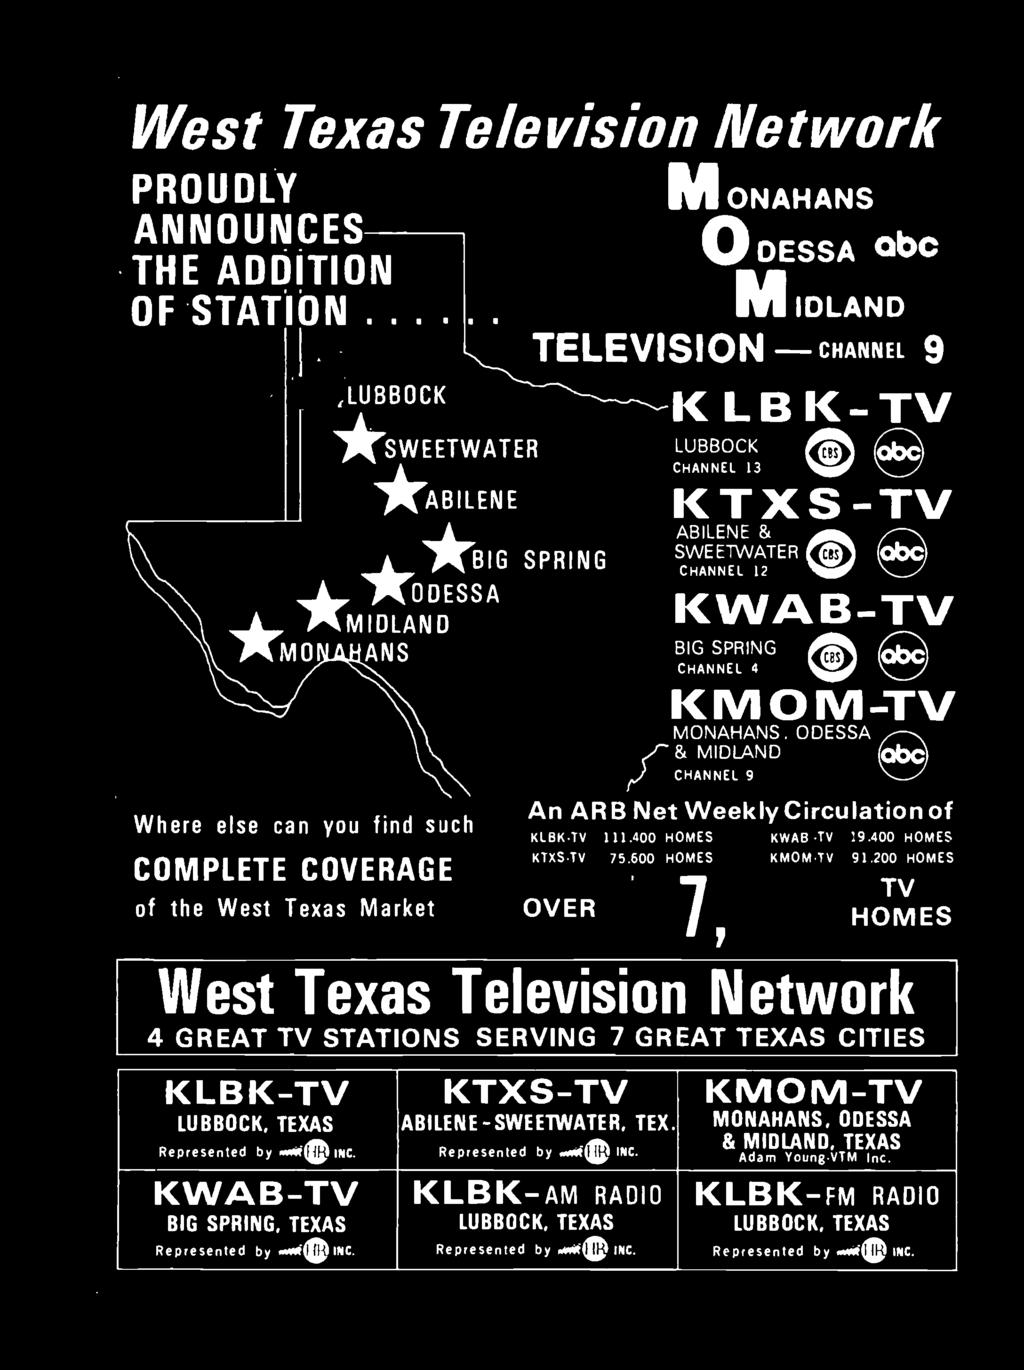 West Texas Television Network PROUDLY ANNOUNCES THE ADDITION OF STATION LUBBOCK *SWEETWATER *ABILENE *BIG SPRING ODESSA ^MIDLAND ANS M ONAHANS ODESSA MIDLAND - TELEVISION CHANNEL 9 K LB K- TV LUBBOCK